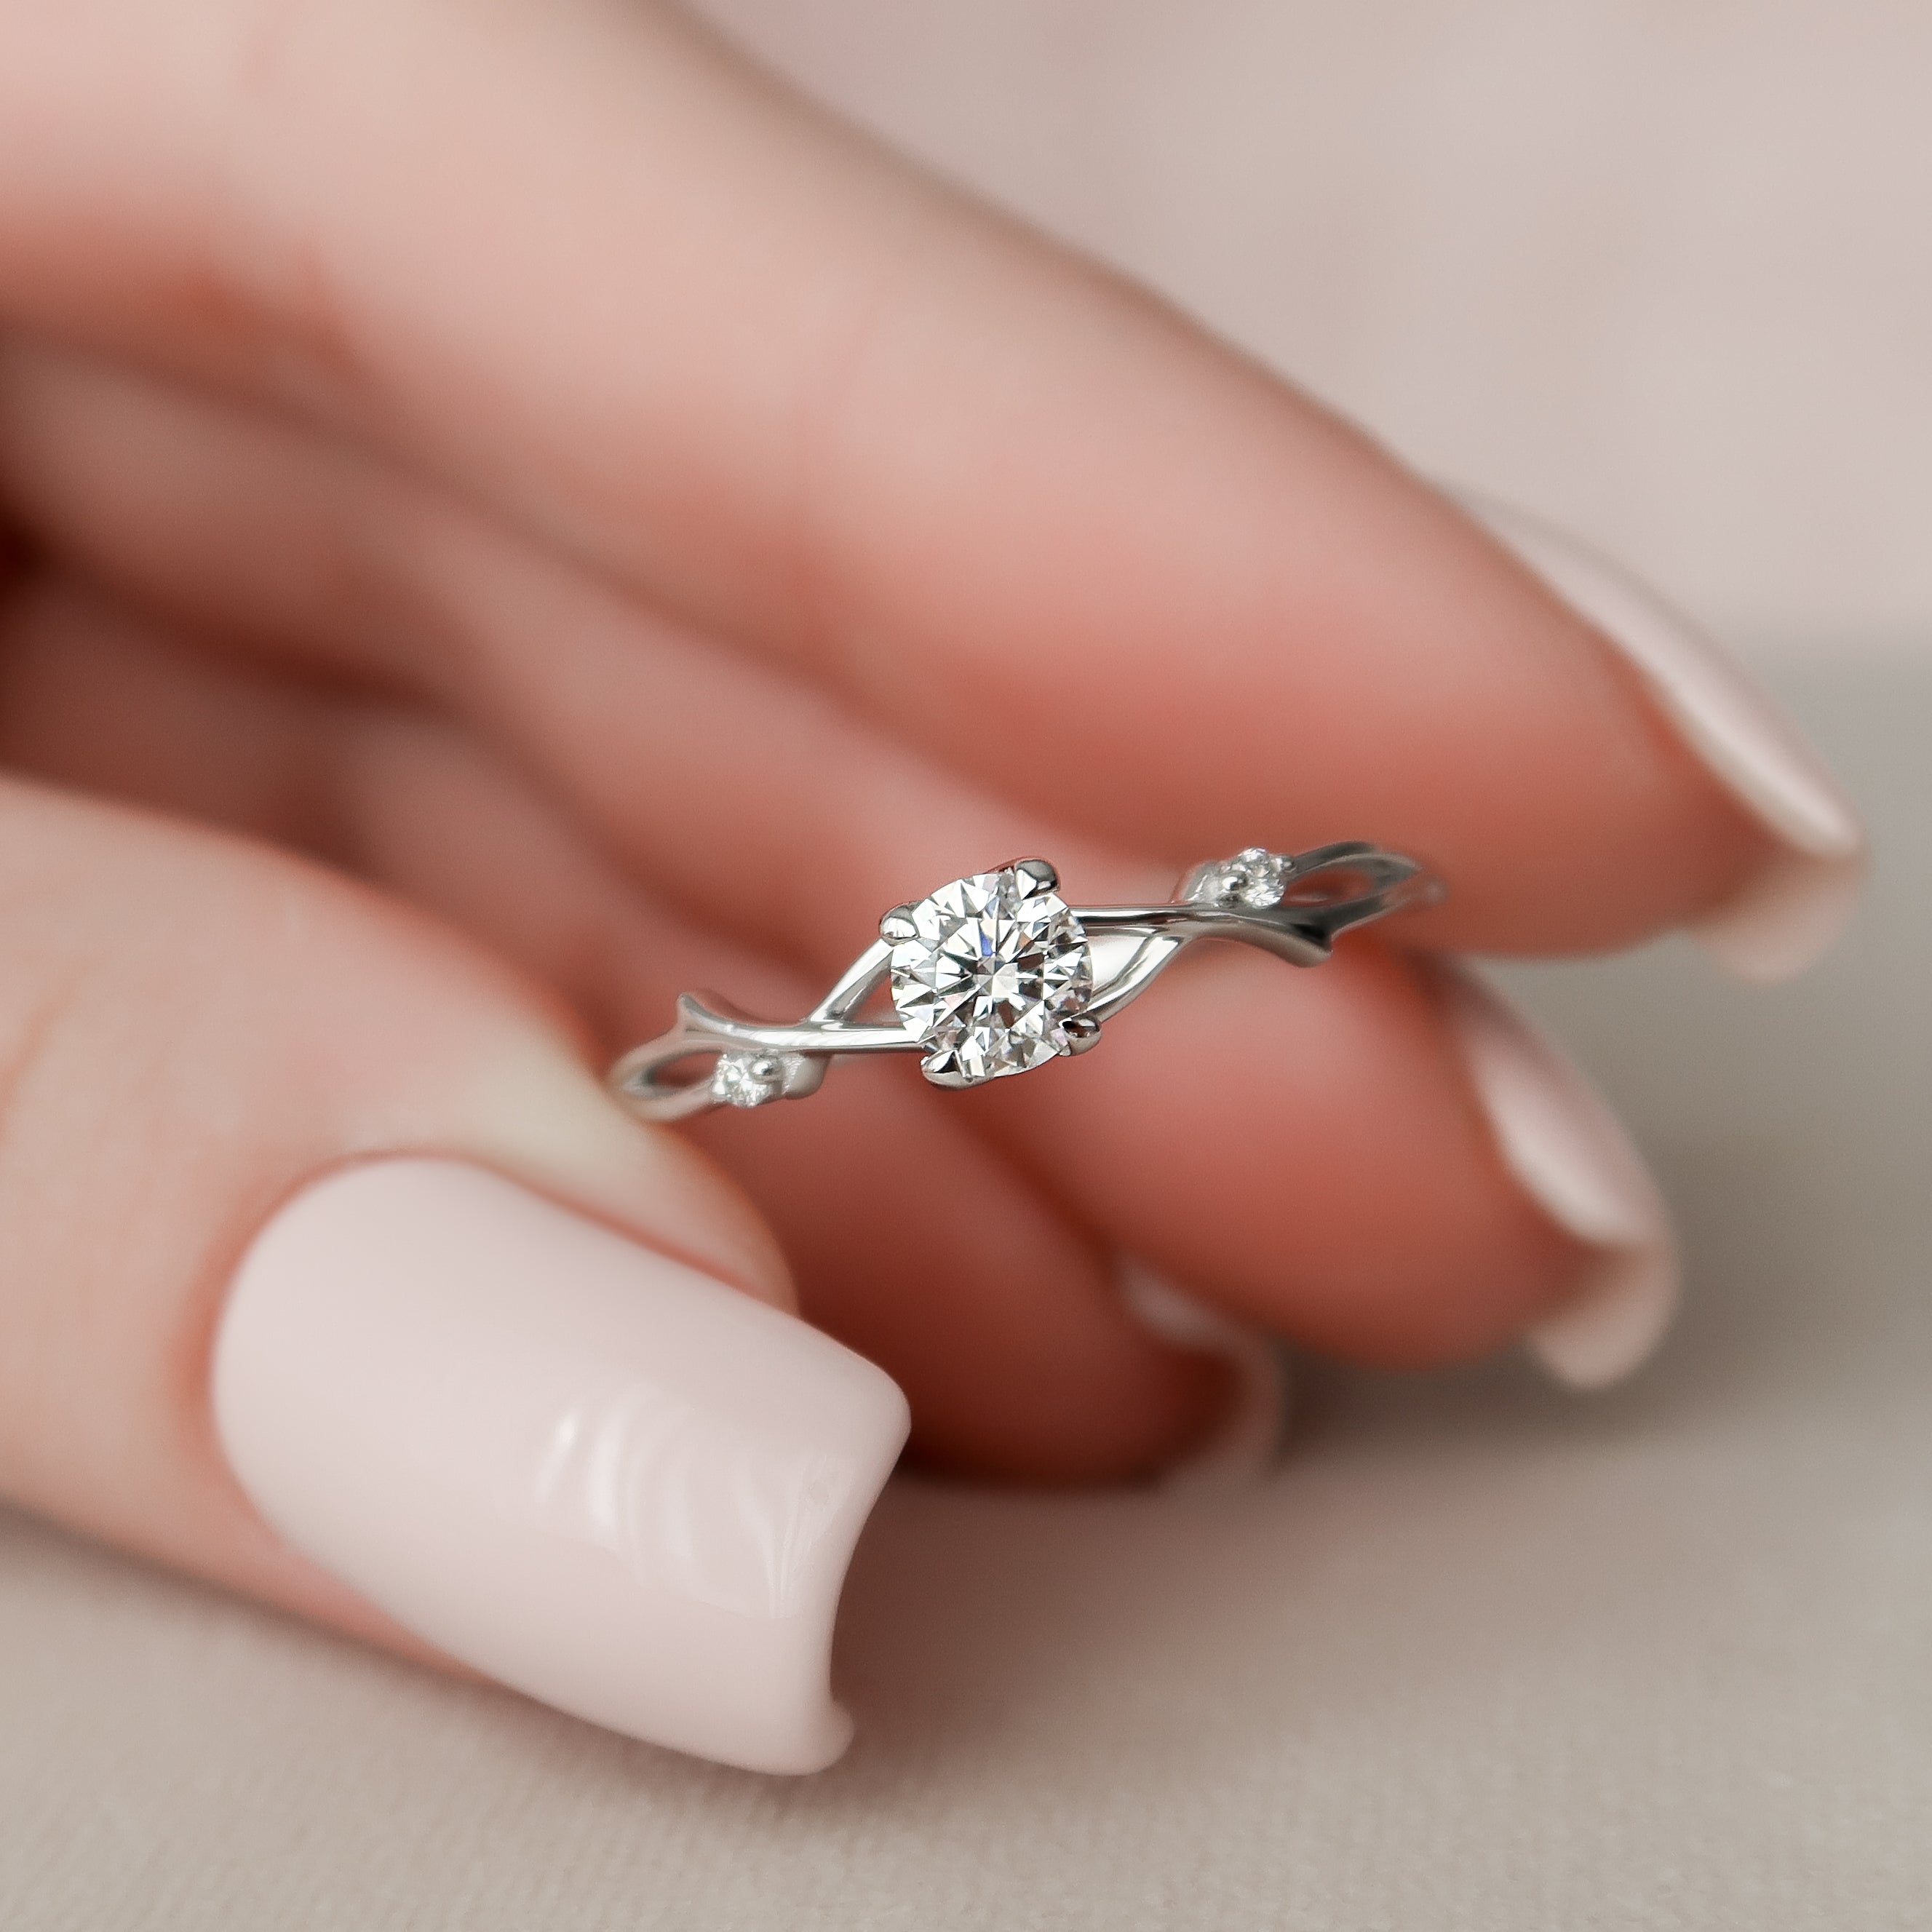 White Gold Engagement Rings: Timeless Or Tacky?